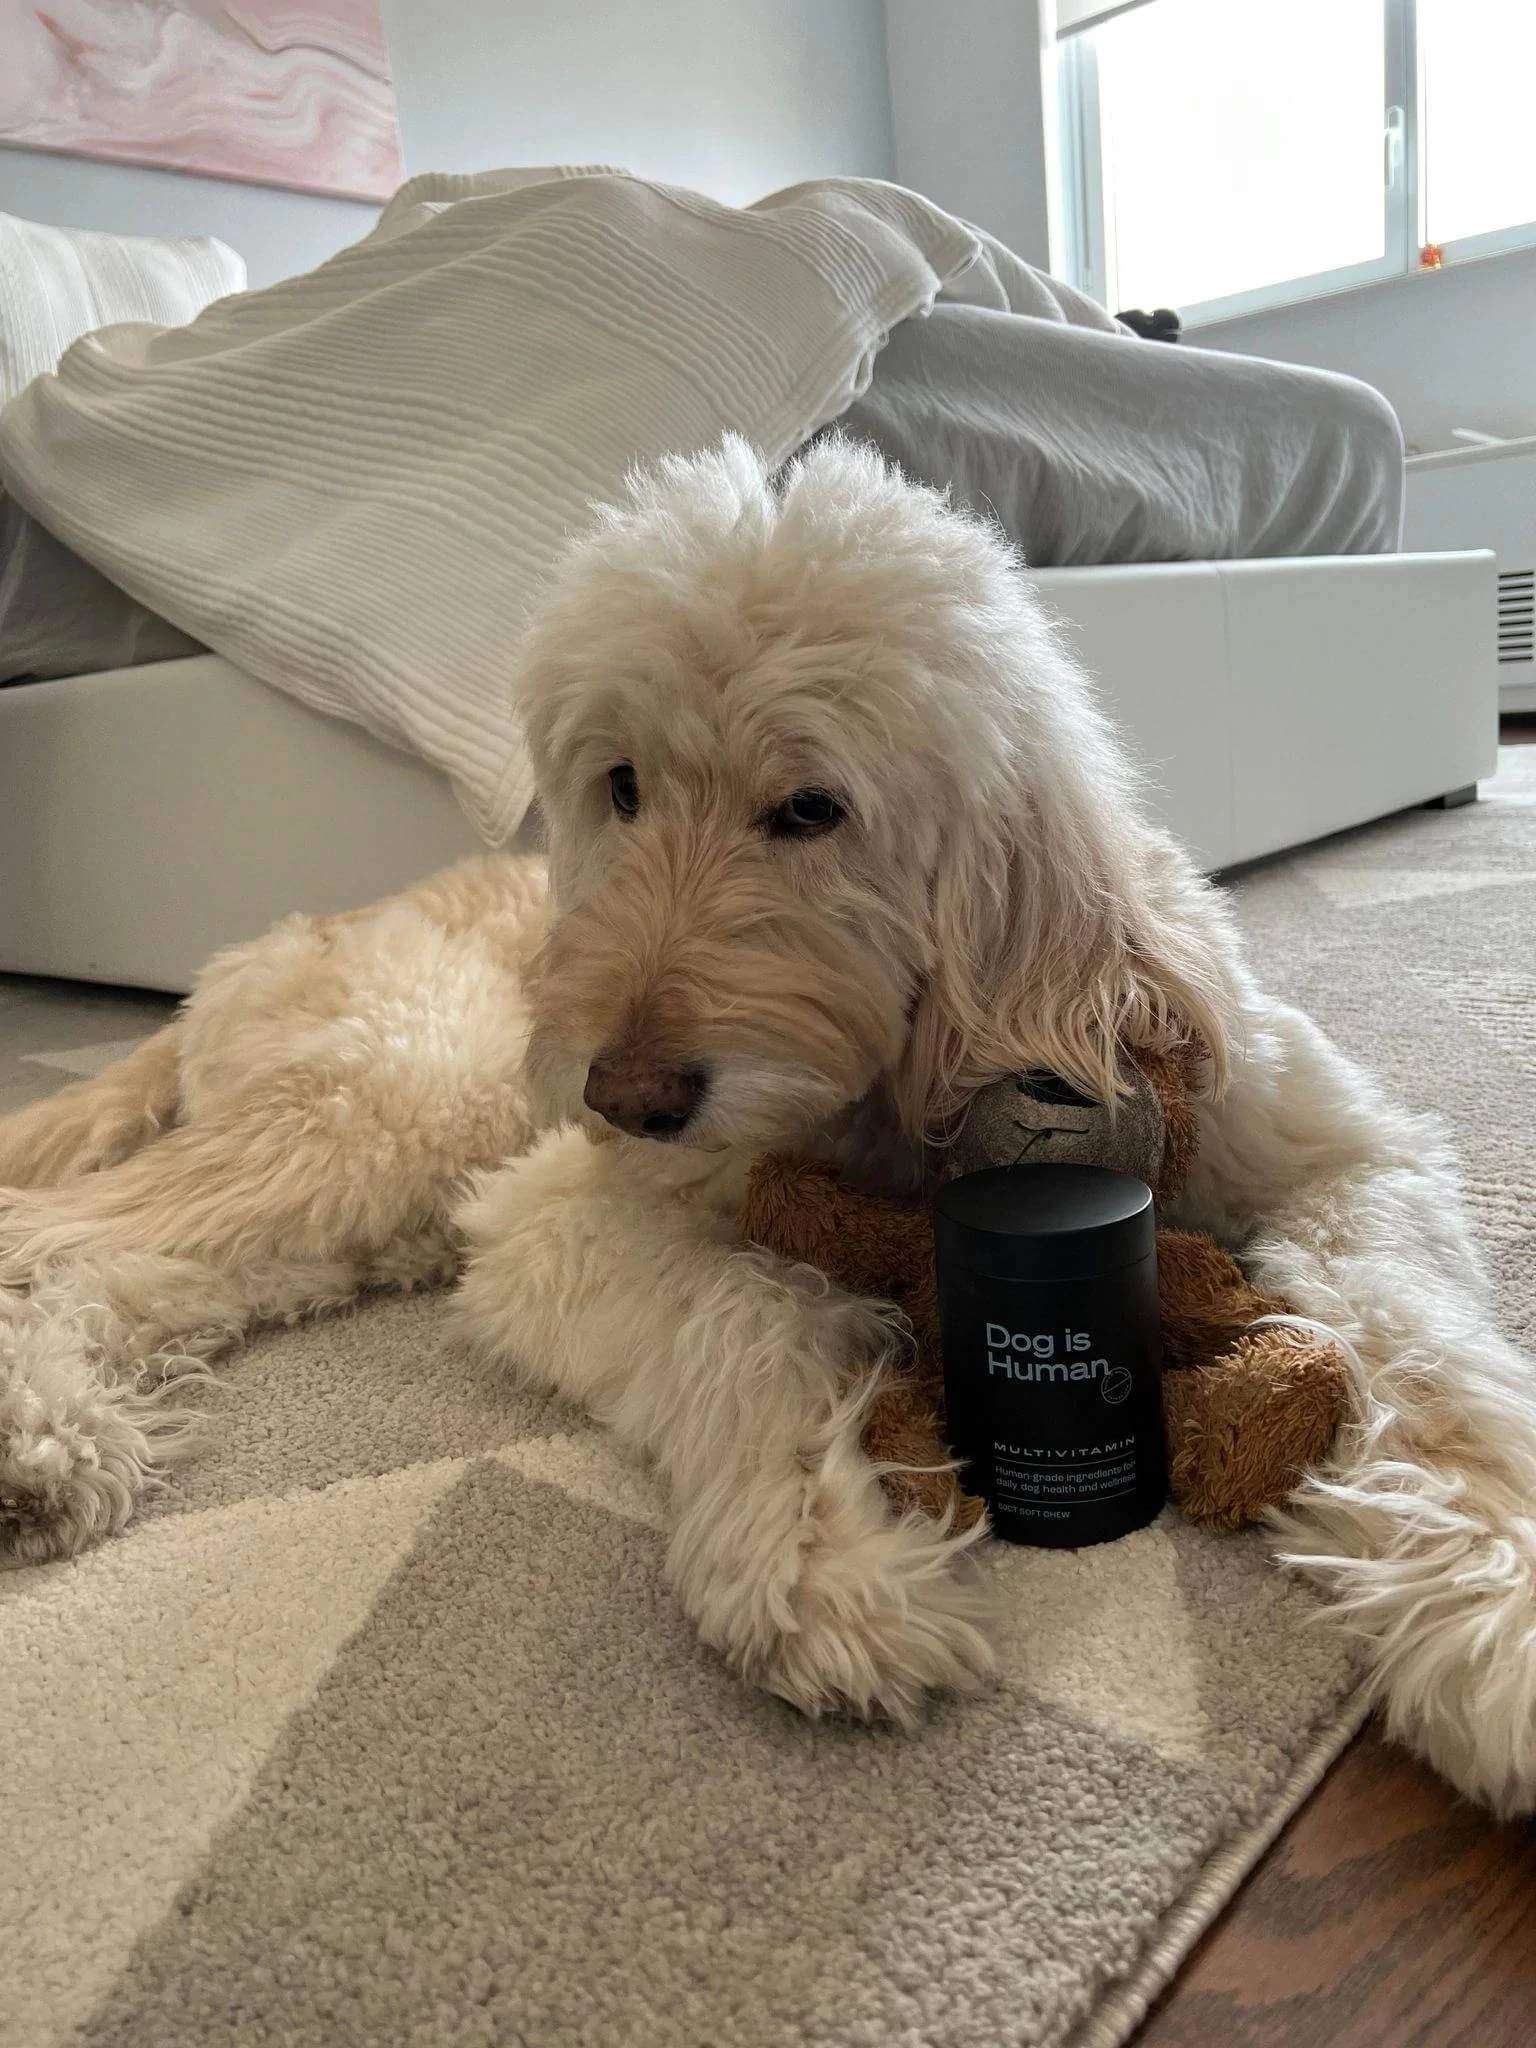 A Goldendoodle laying with a Dog is Human multivitamin jar.